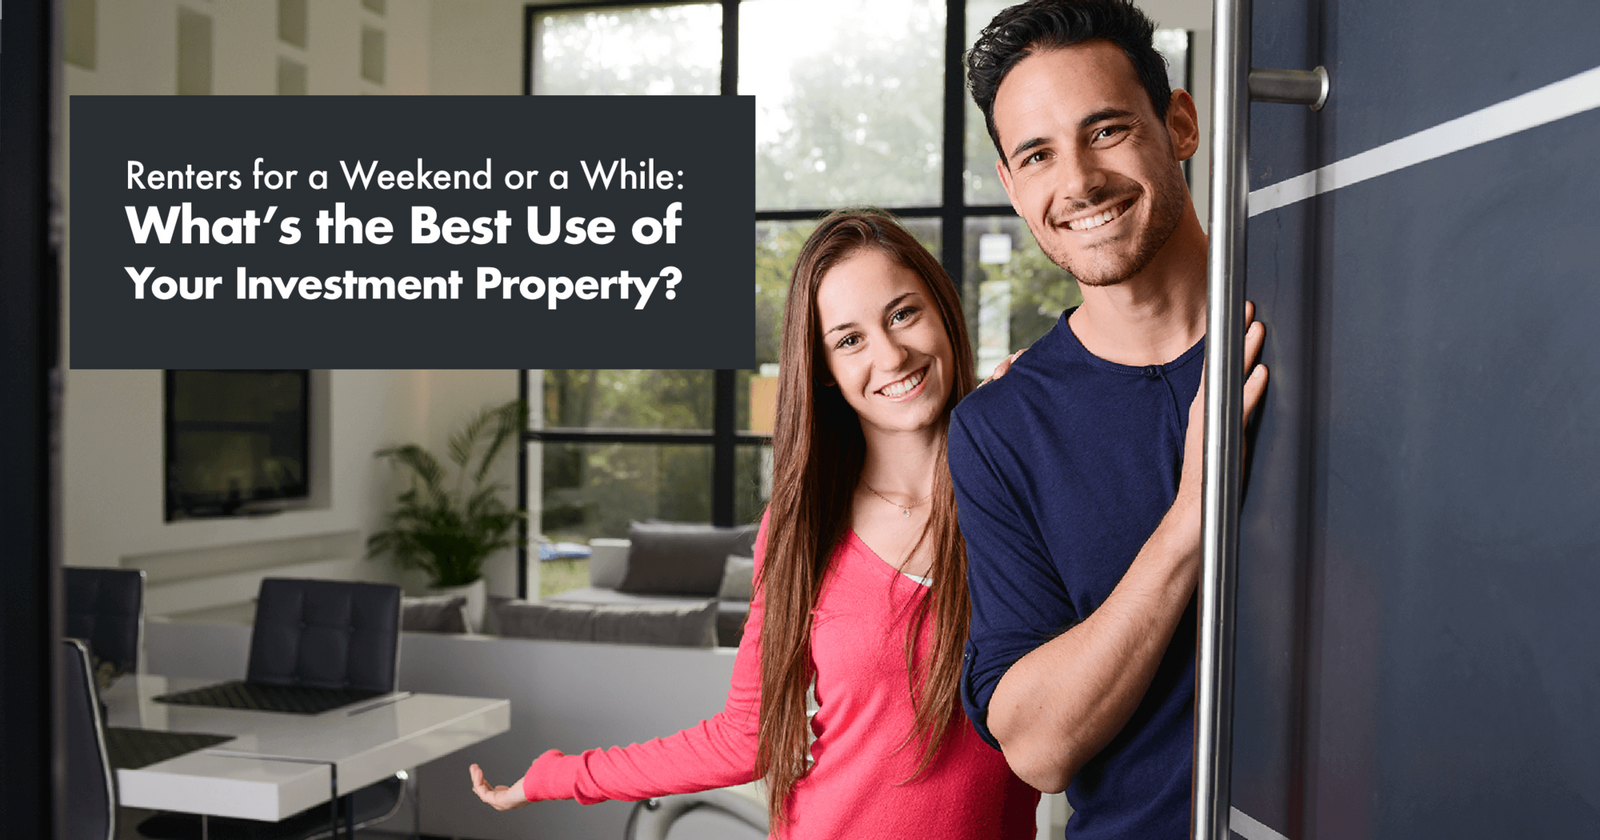 Renters for a Weekend or a While: What's the Best Use of Your Investment Property?